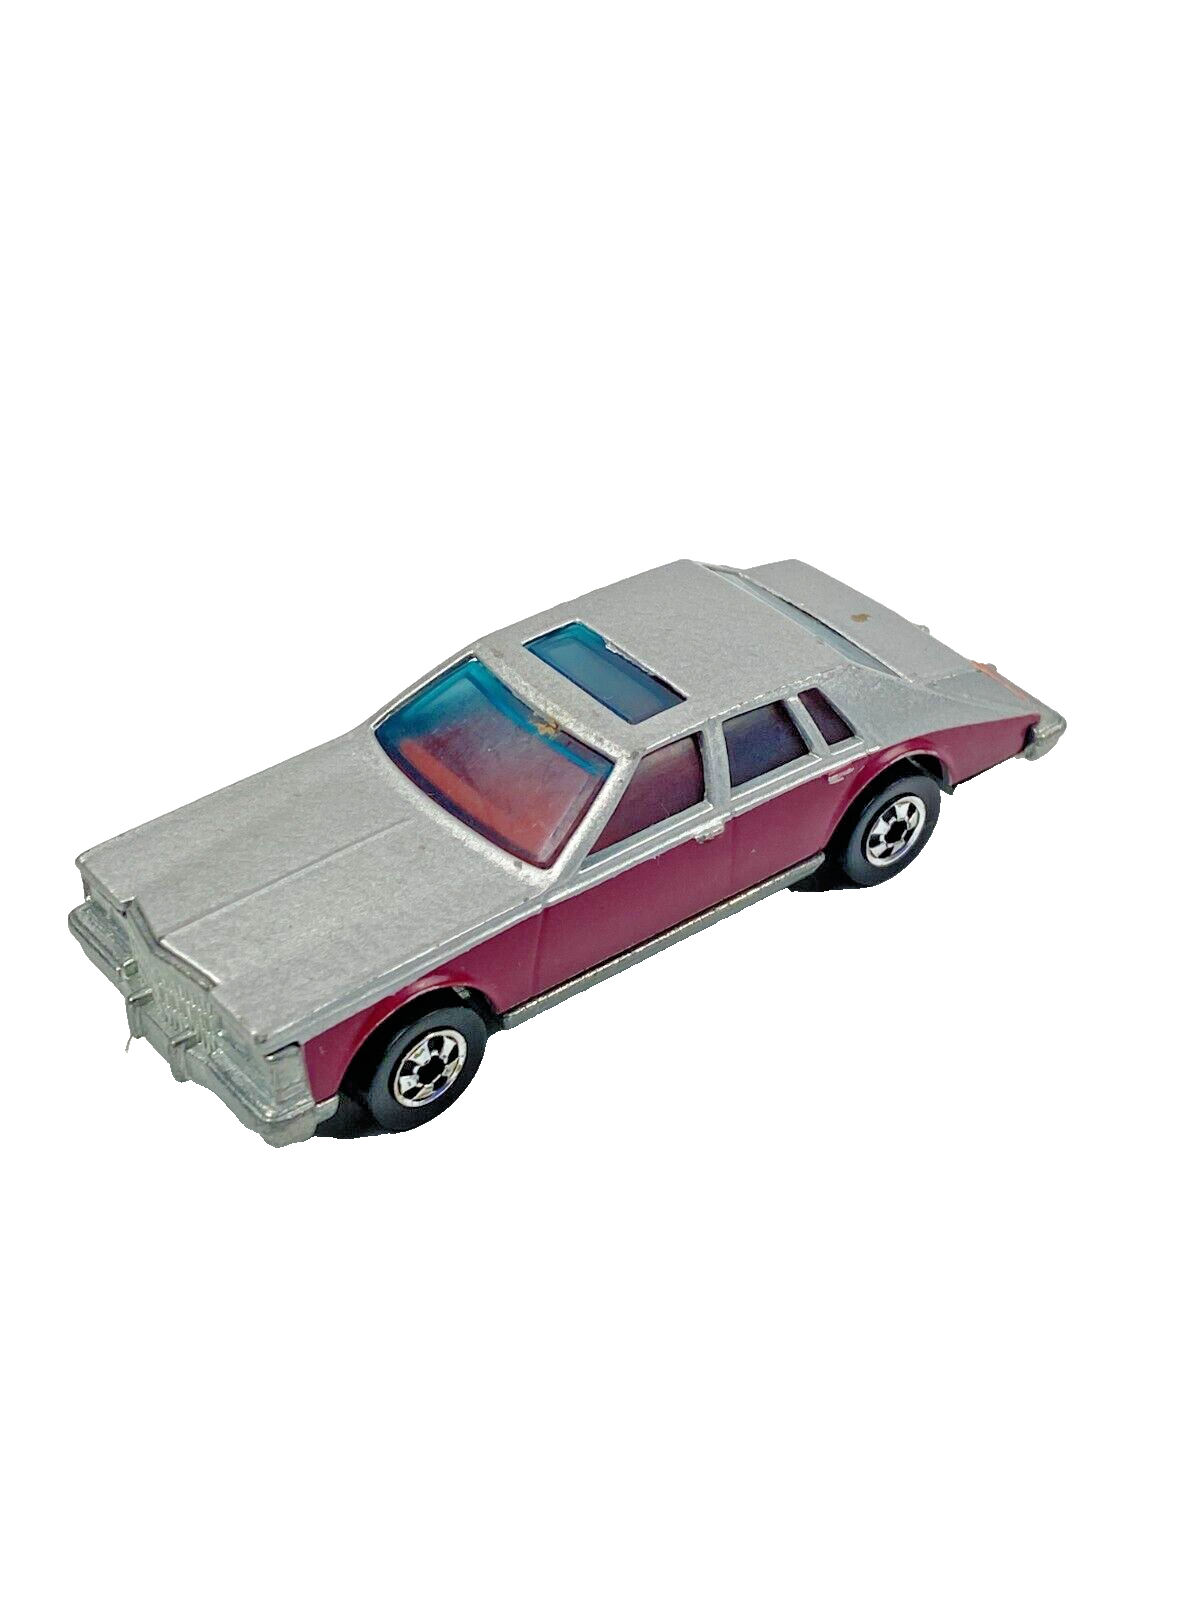 Primary image for Hot Wheels Cadillac Seville 1980 Vintage Diecast Toy Car Mattel Hong Kong